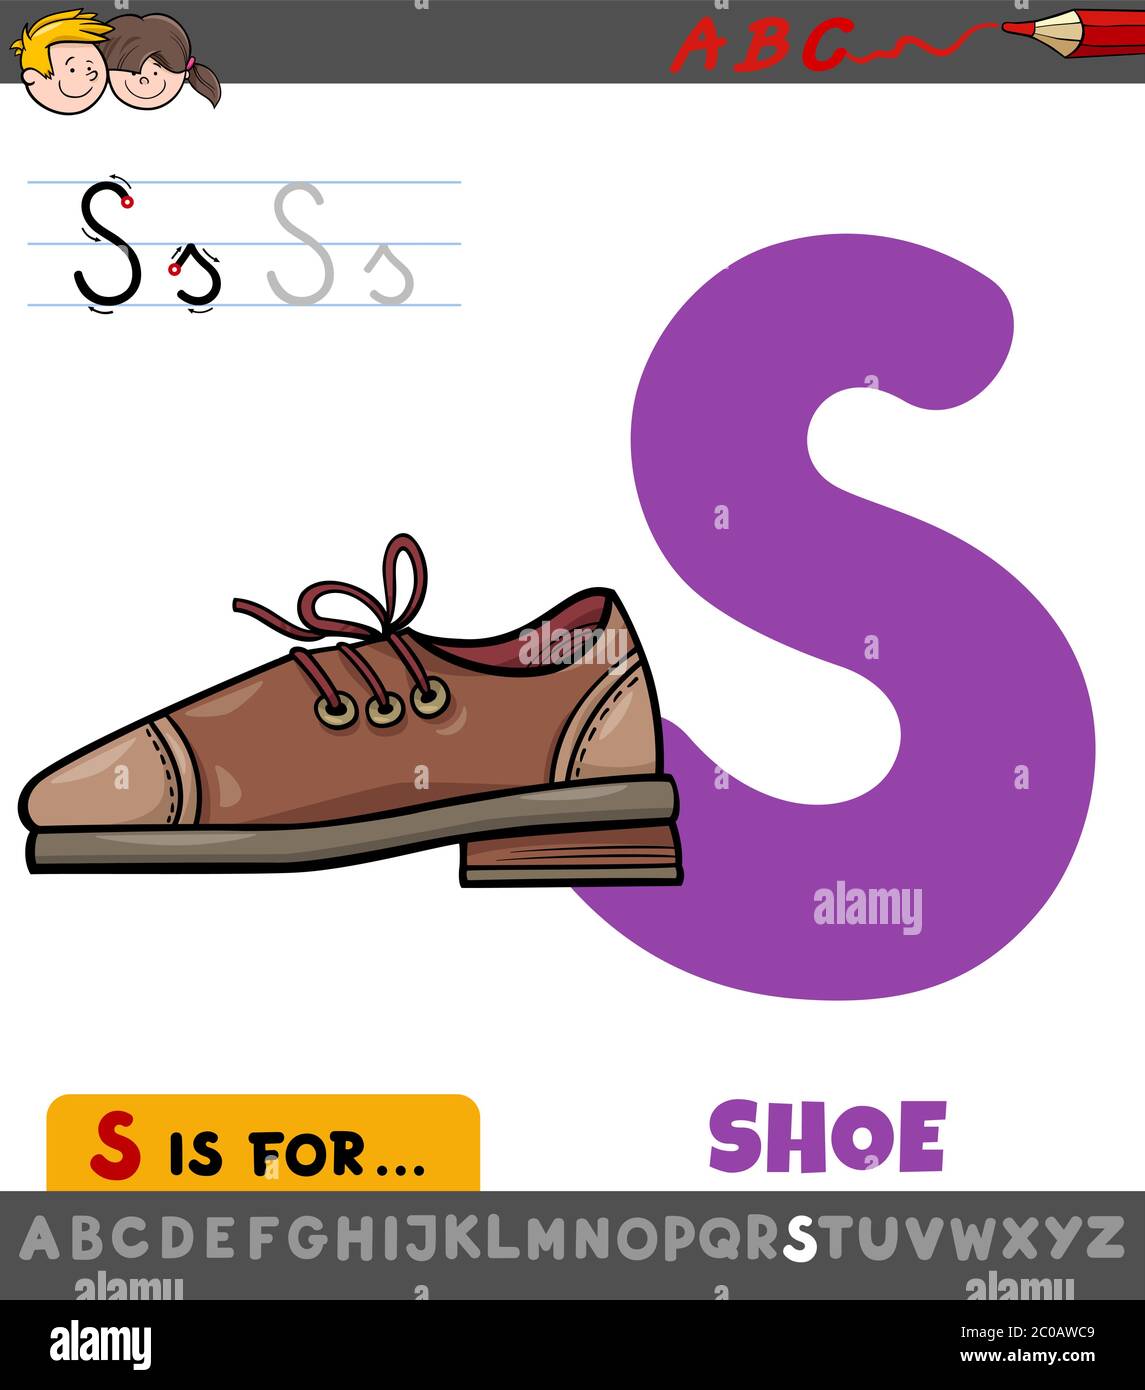 Educational Cartoon Illustration of Letter S from Alphabet with Shoe for Children Stock Vector